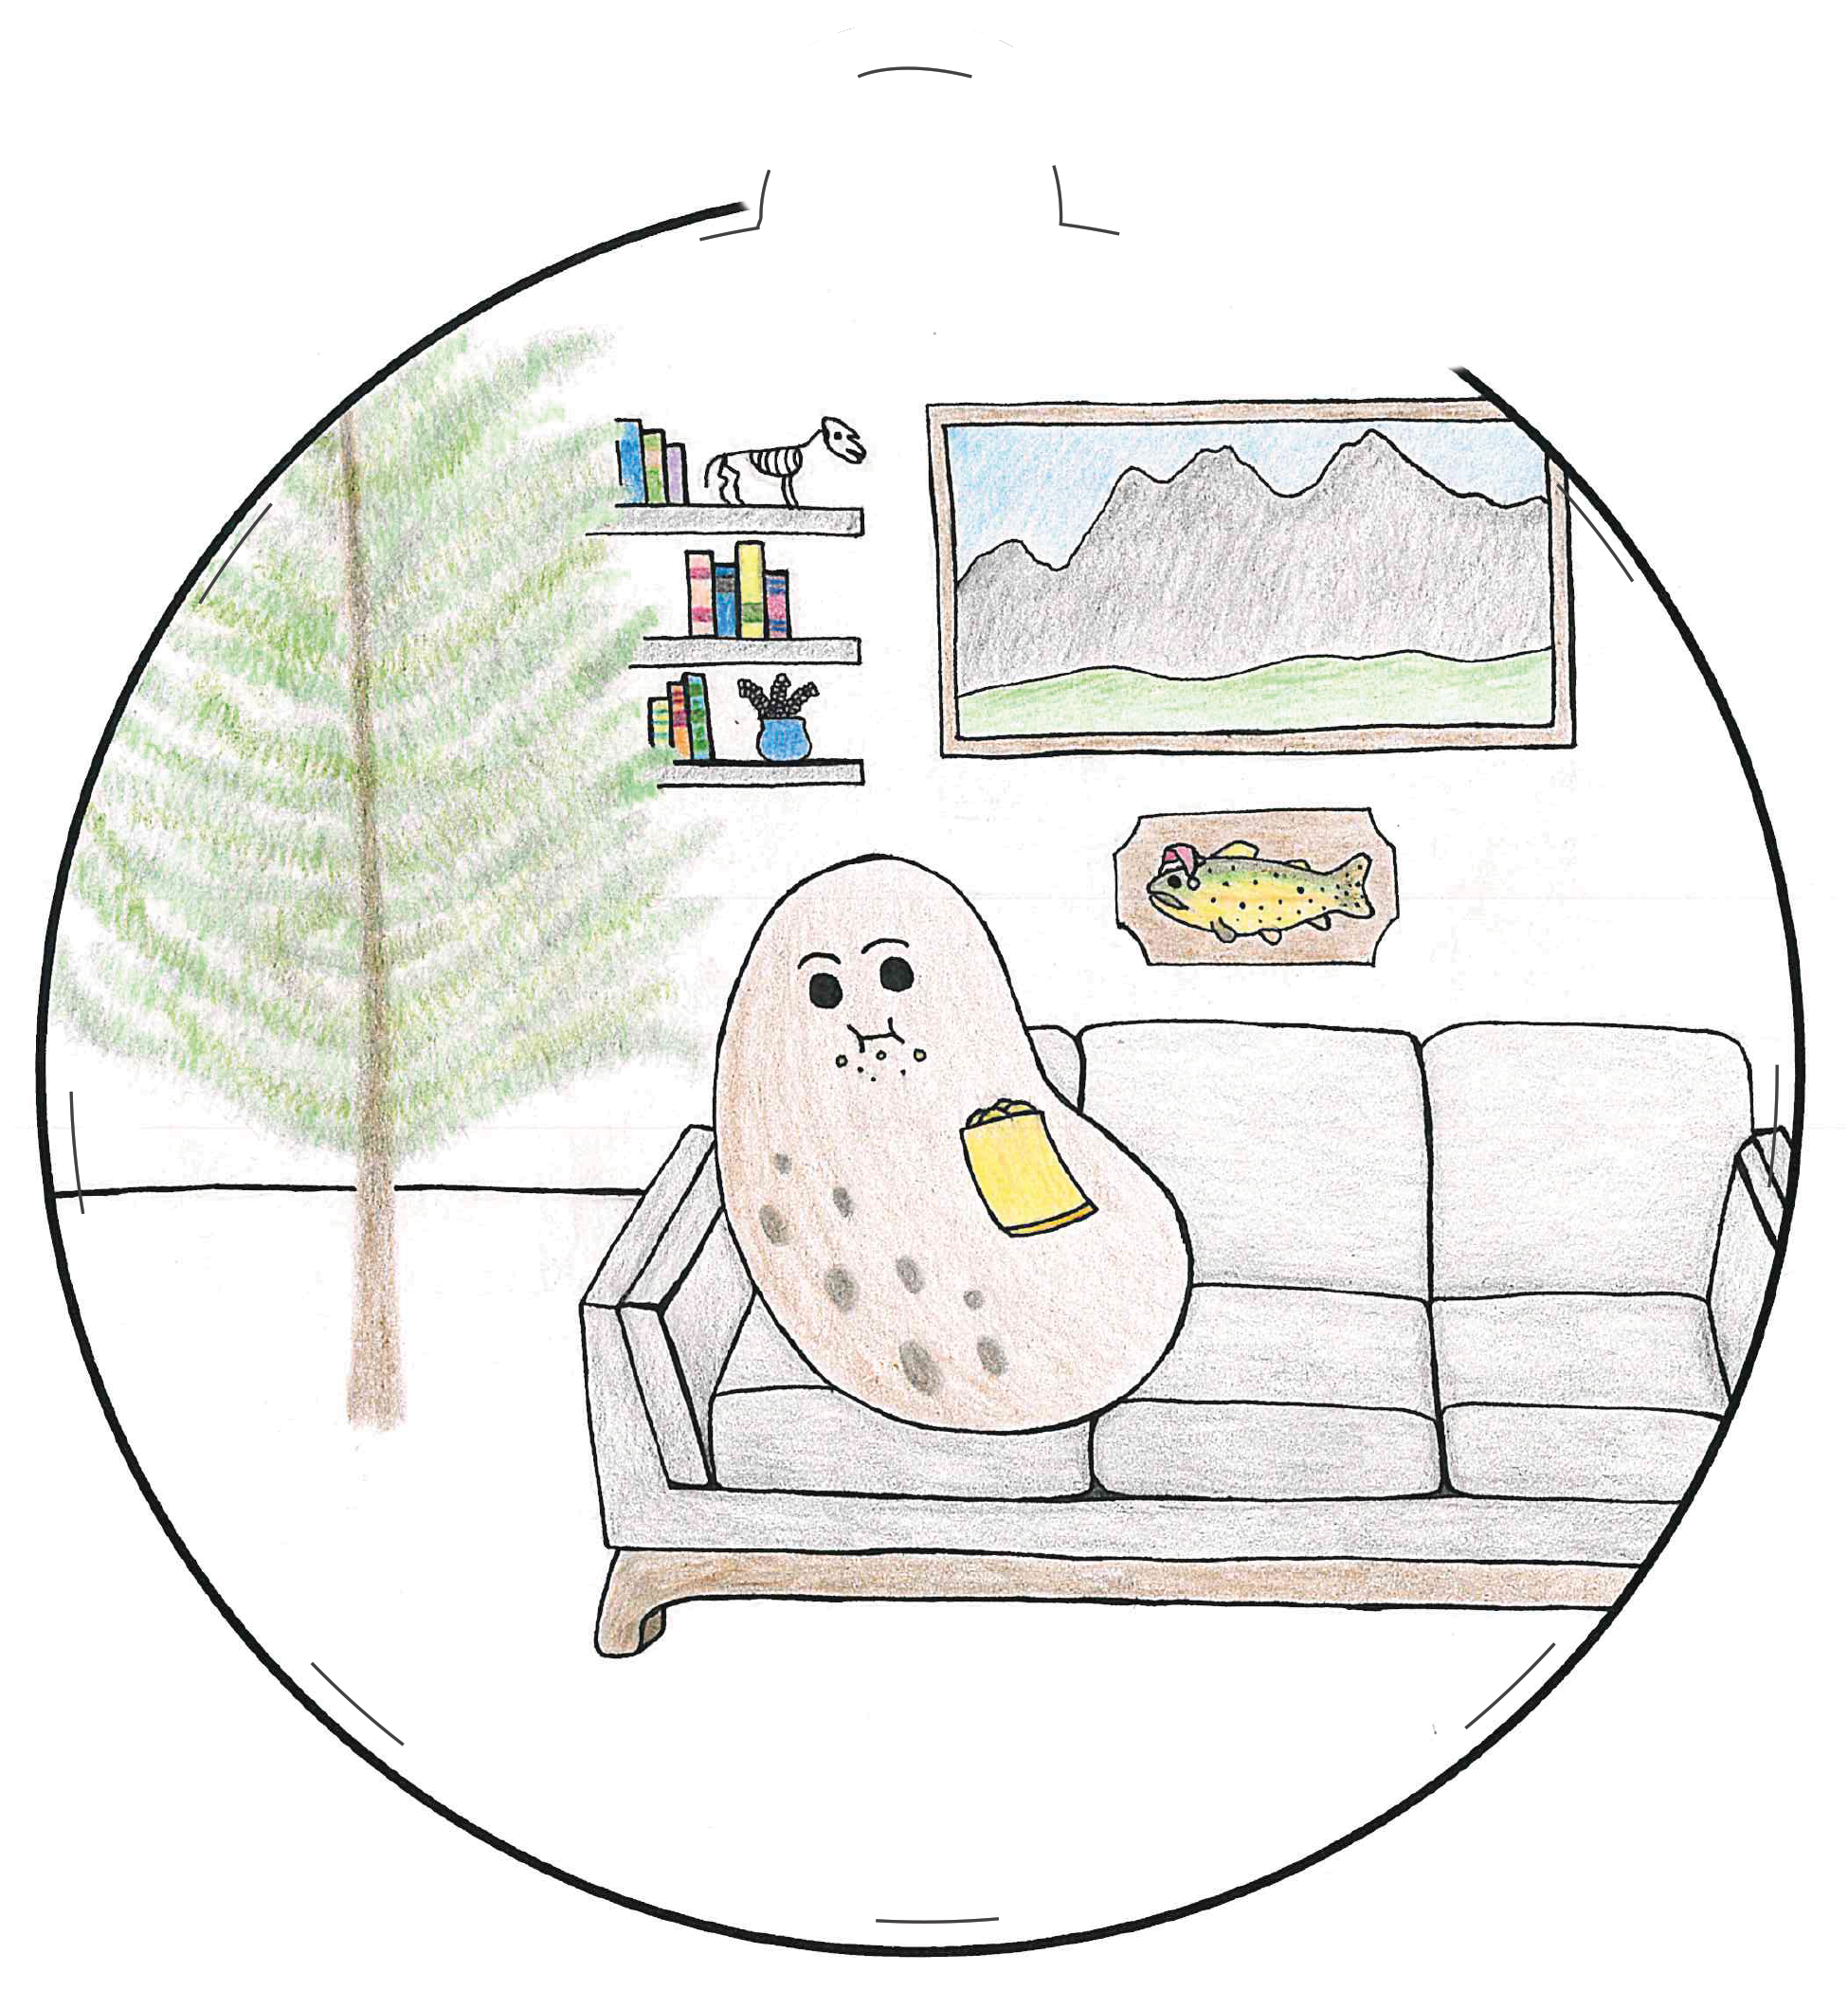 Ornament depicting a potato lounging on a couch